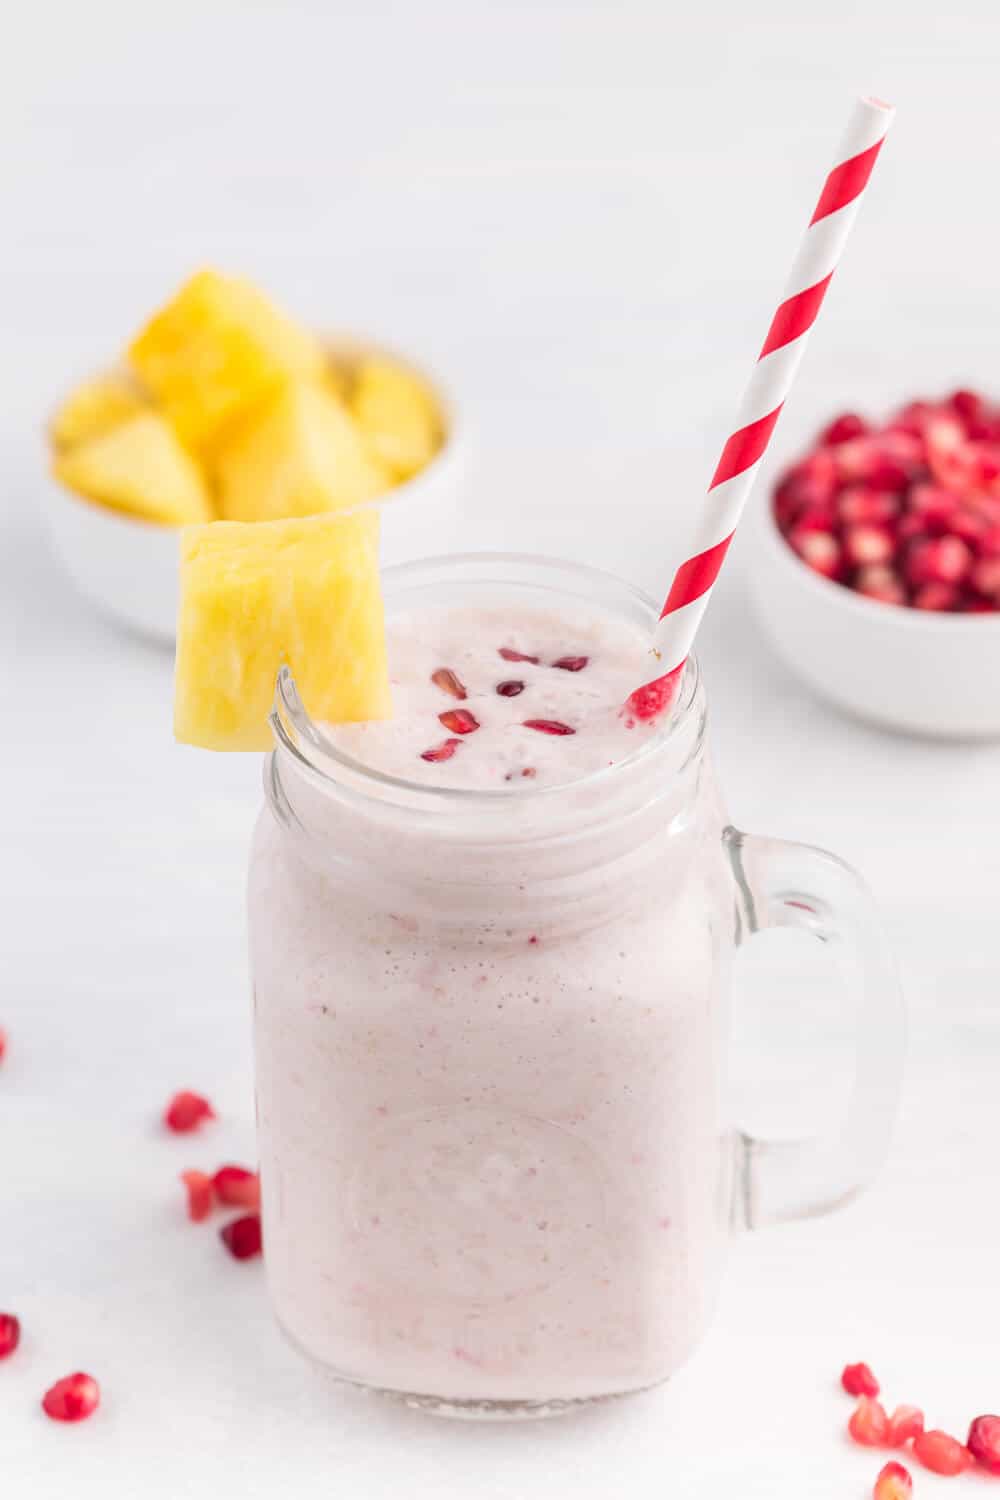 Pineapple Pomegranate Smoothie - Using a coconut milk base for a guilt-free tropical flavour, along with pineapple and banana, this smoothie will transport you to a tropical locale, without paying for a plane ticket!